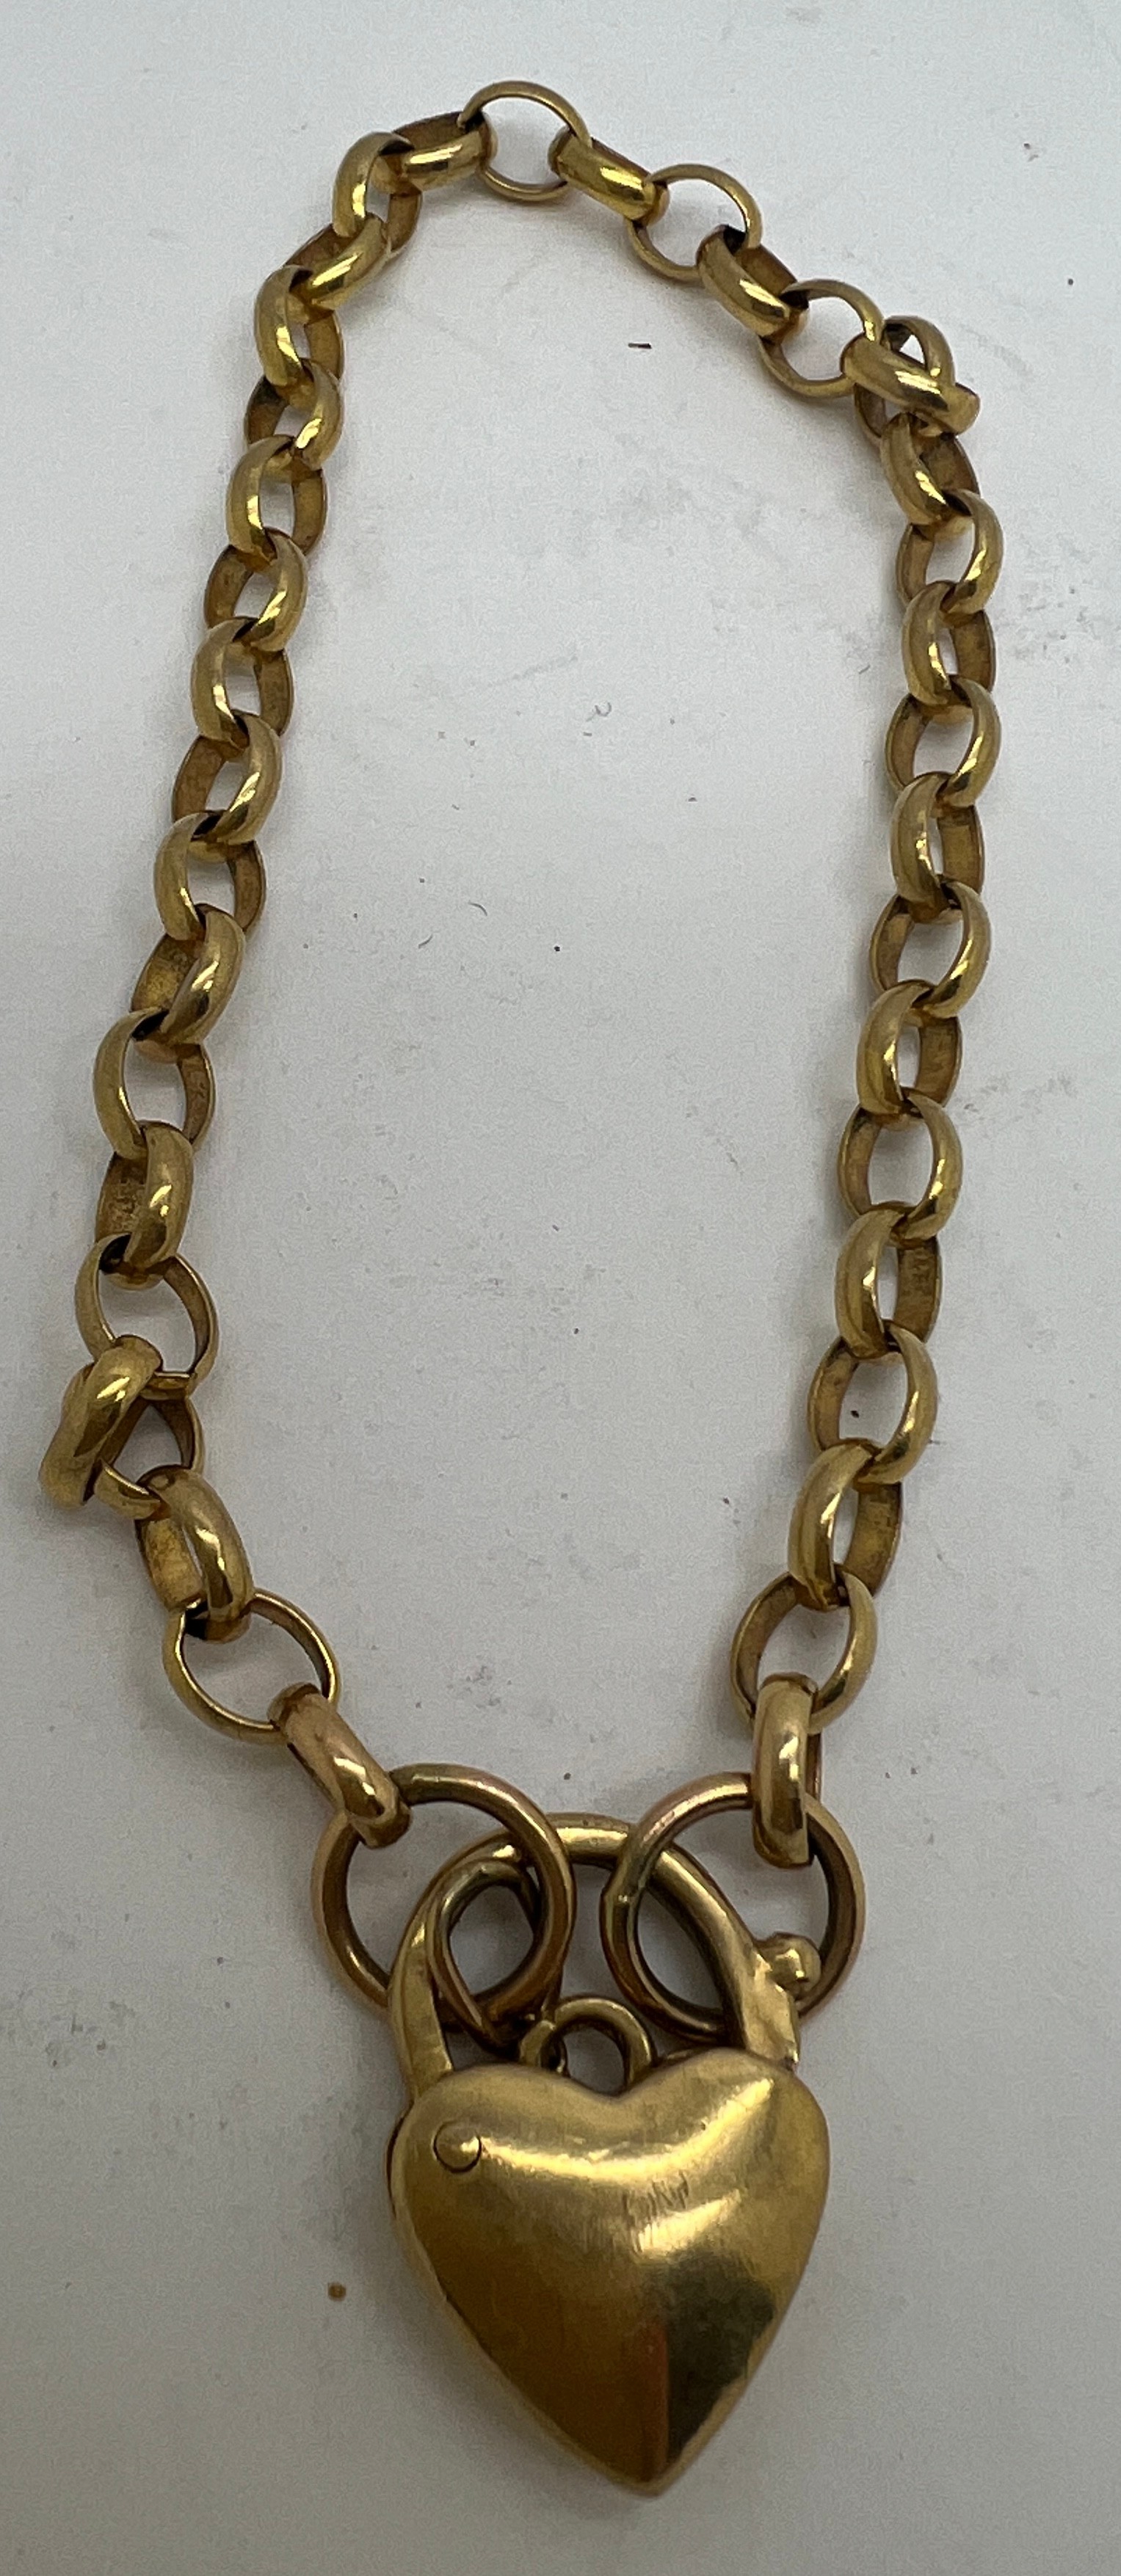 A yellow metal chain bracelet with heart shaped fastening marked 9 carat. Weight 9gm. - Image 2 of 2